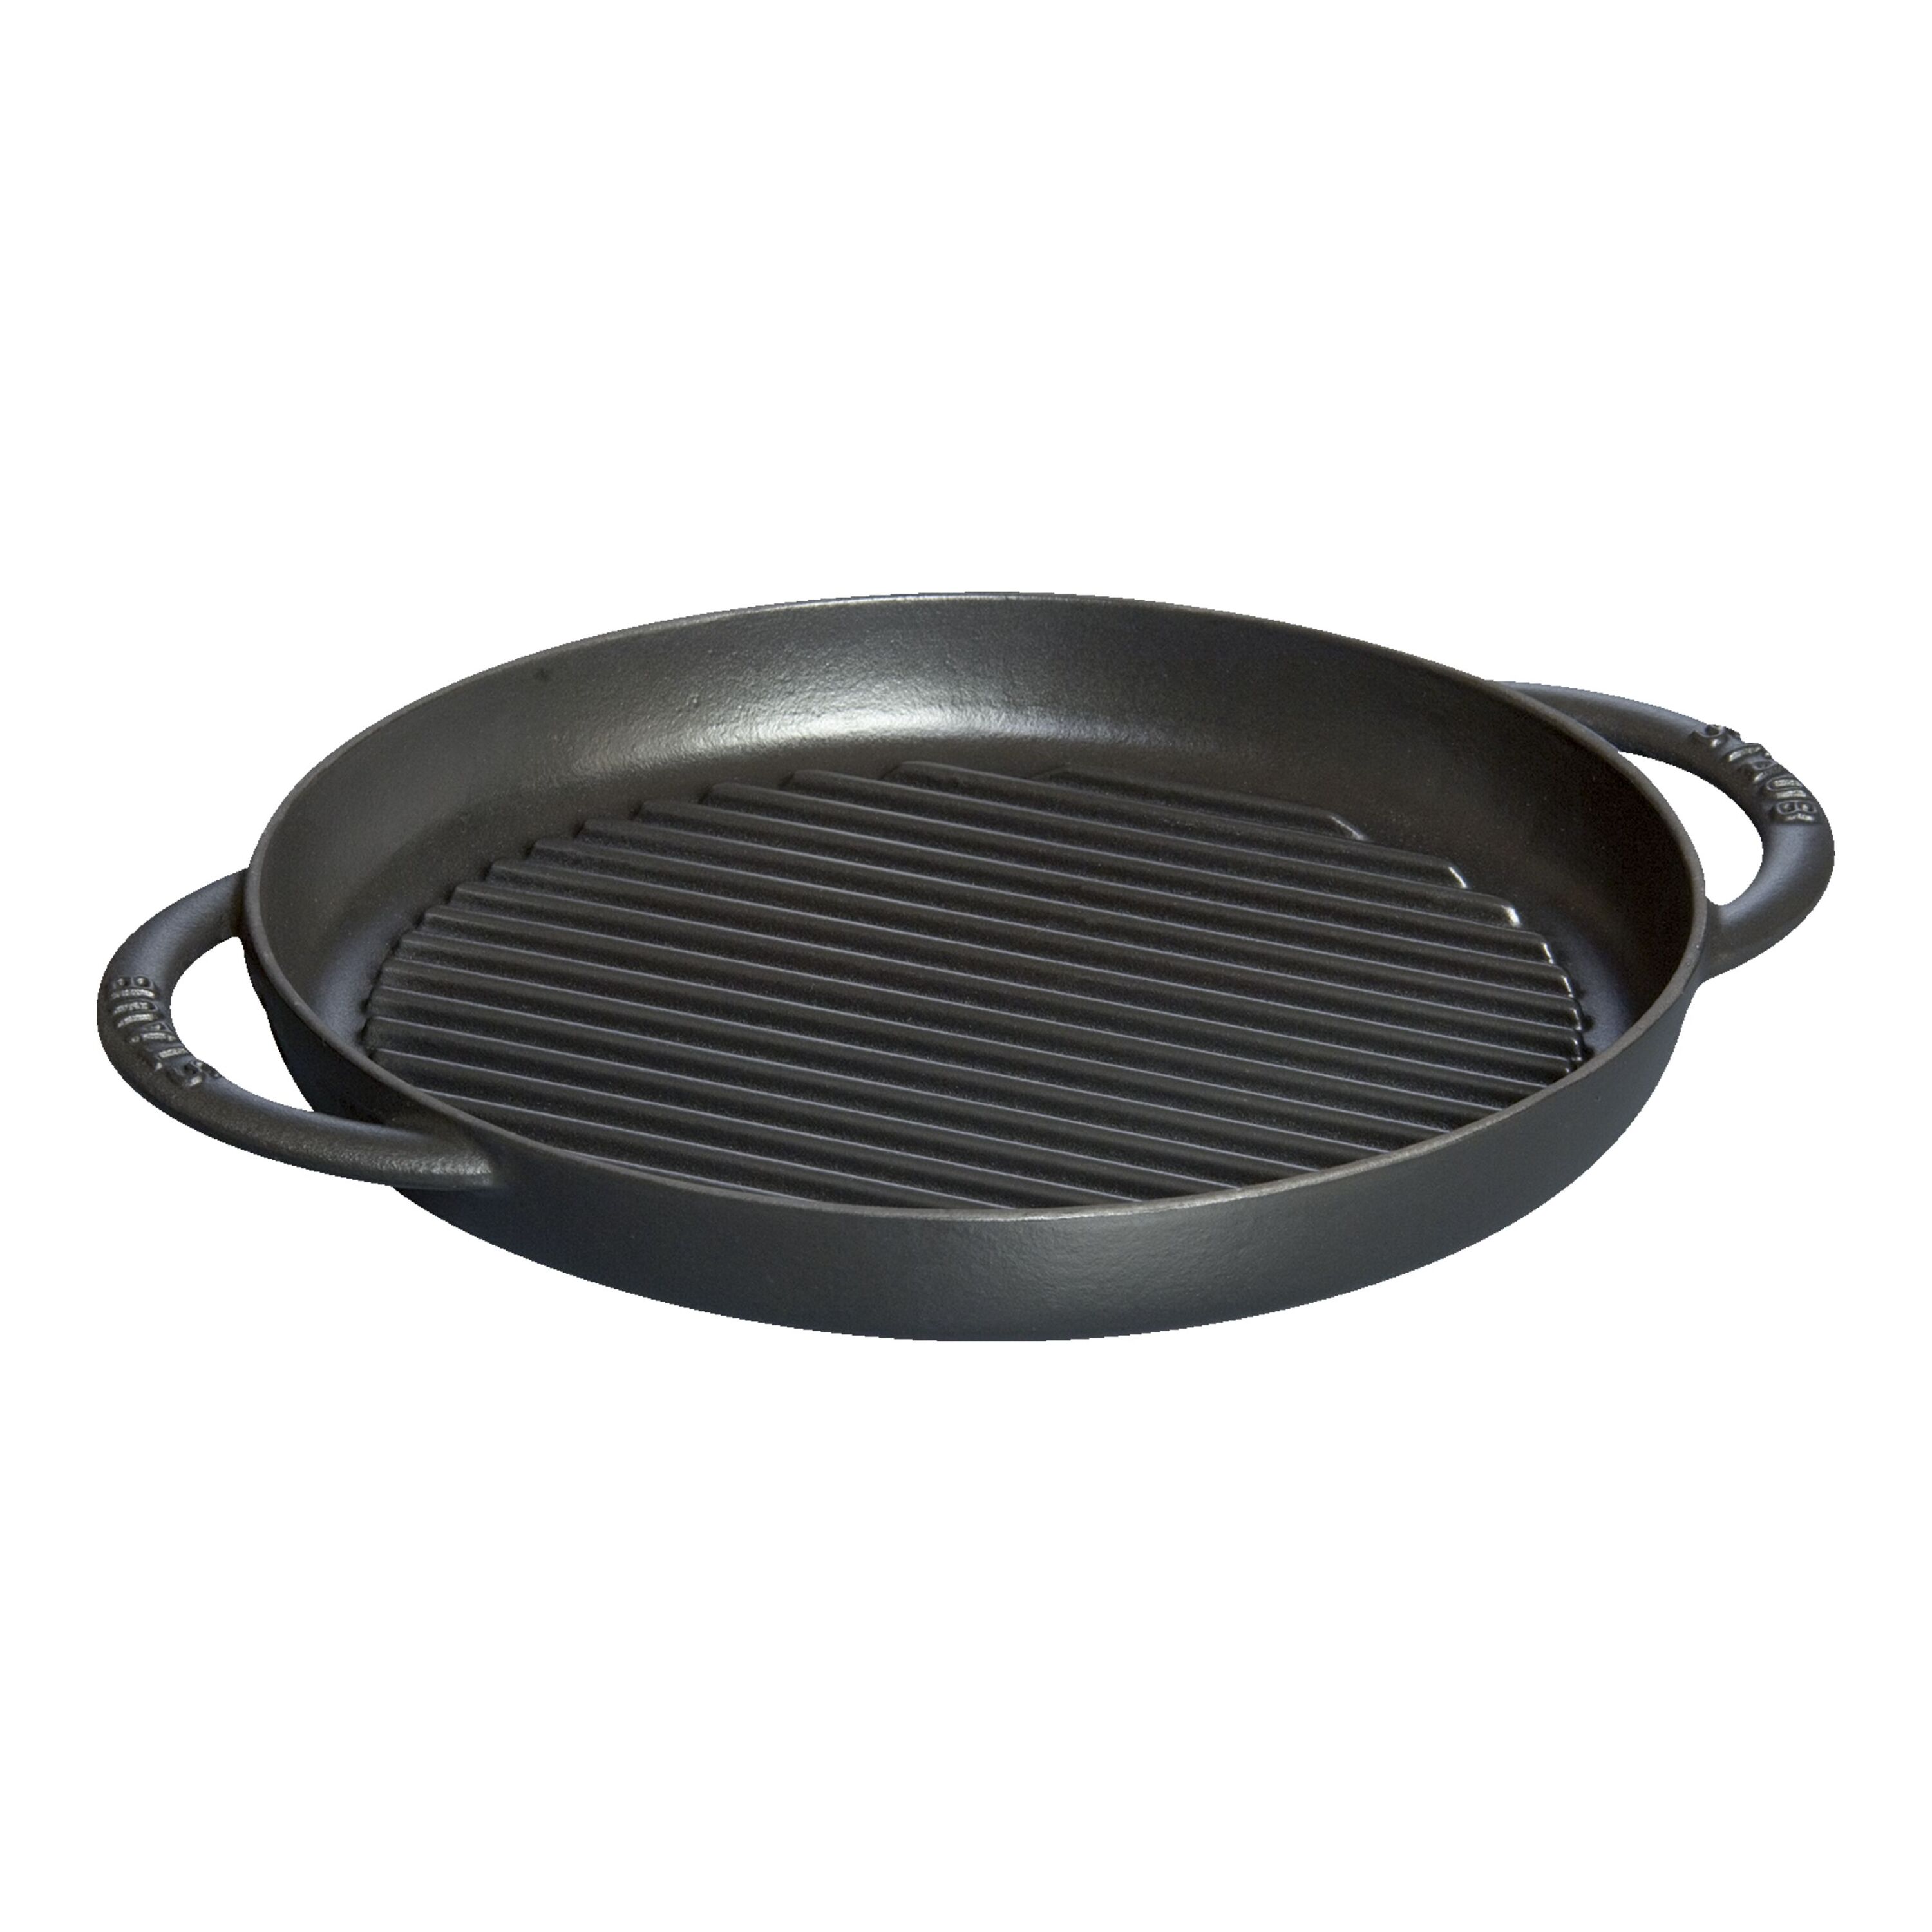 Cast Iron 11 Inch Round Grill Pan Skillet Frying Pan for Indoor